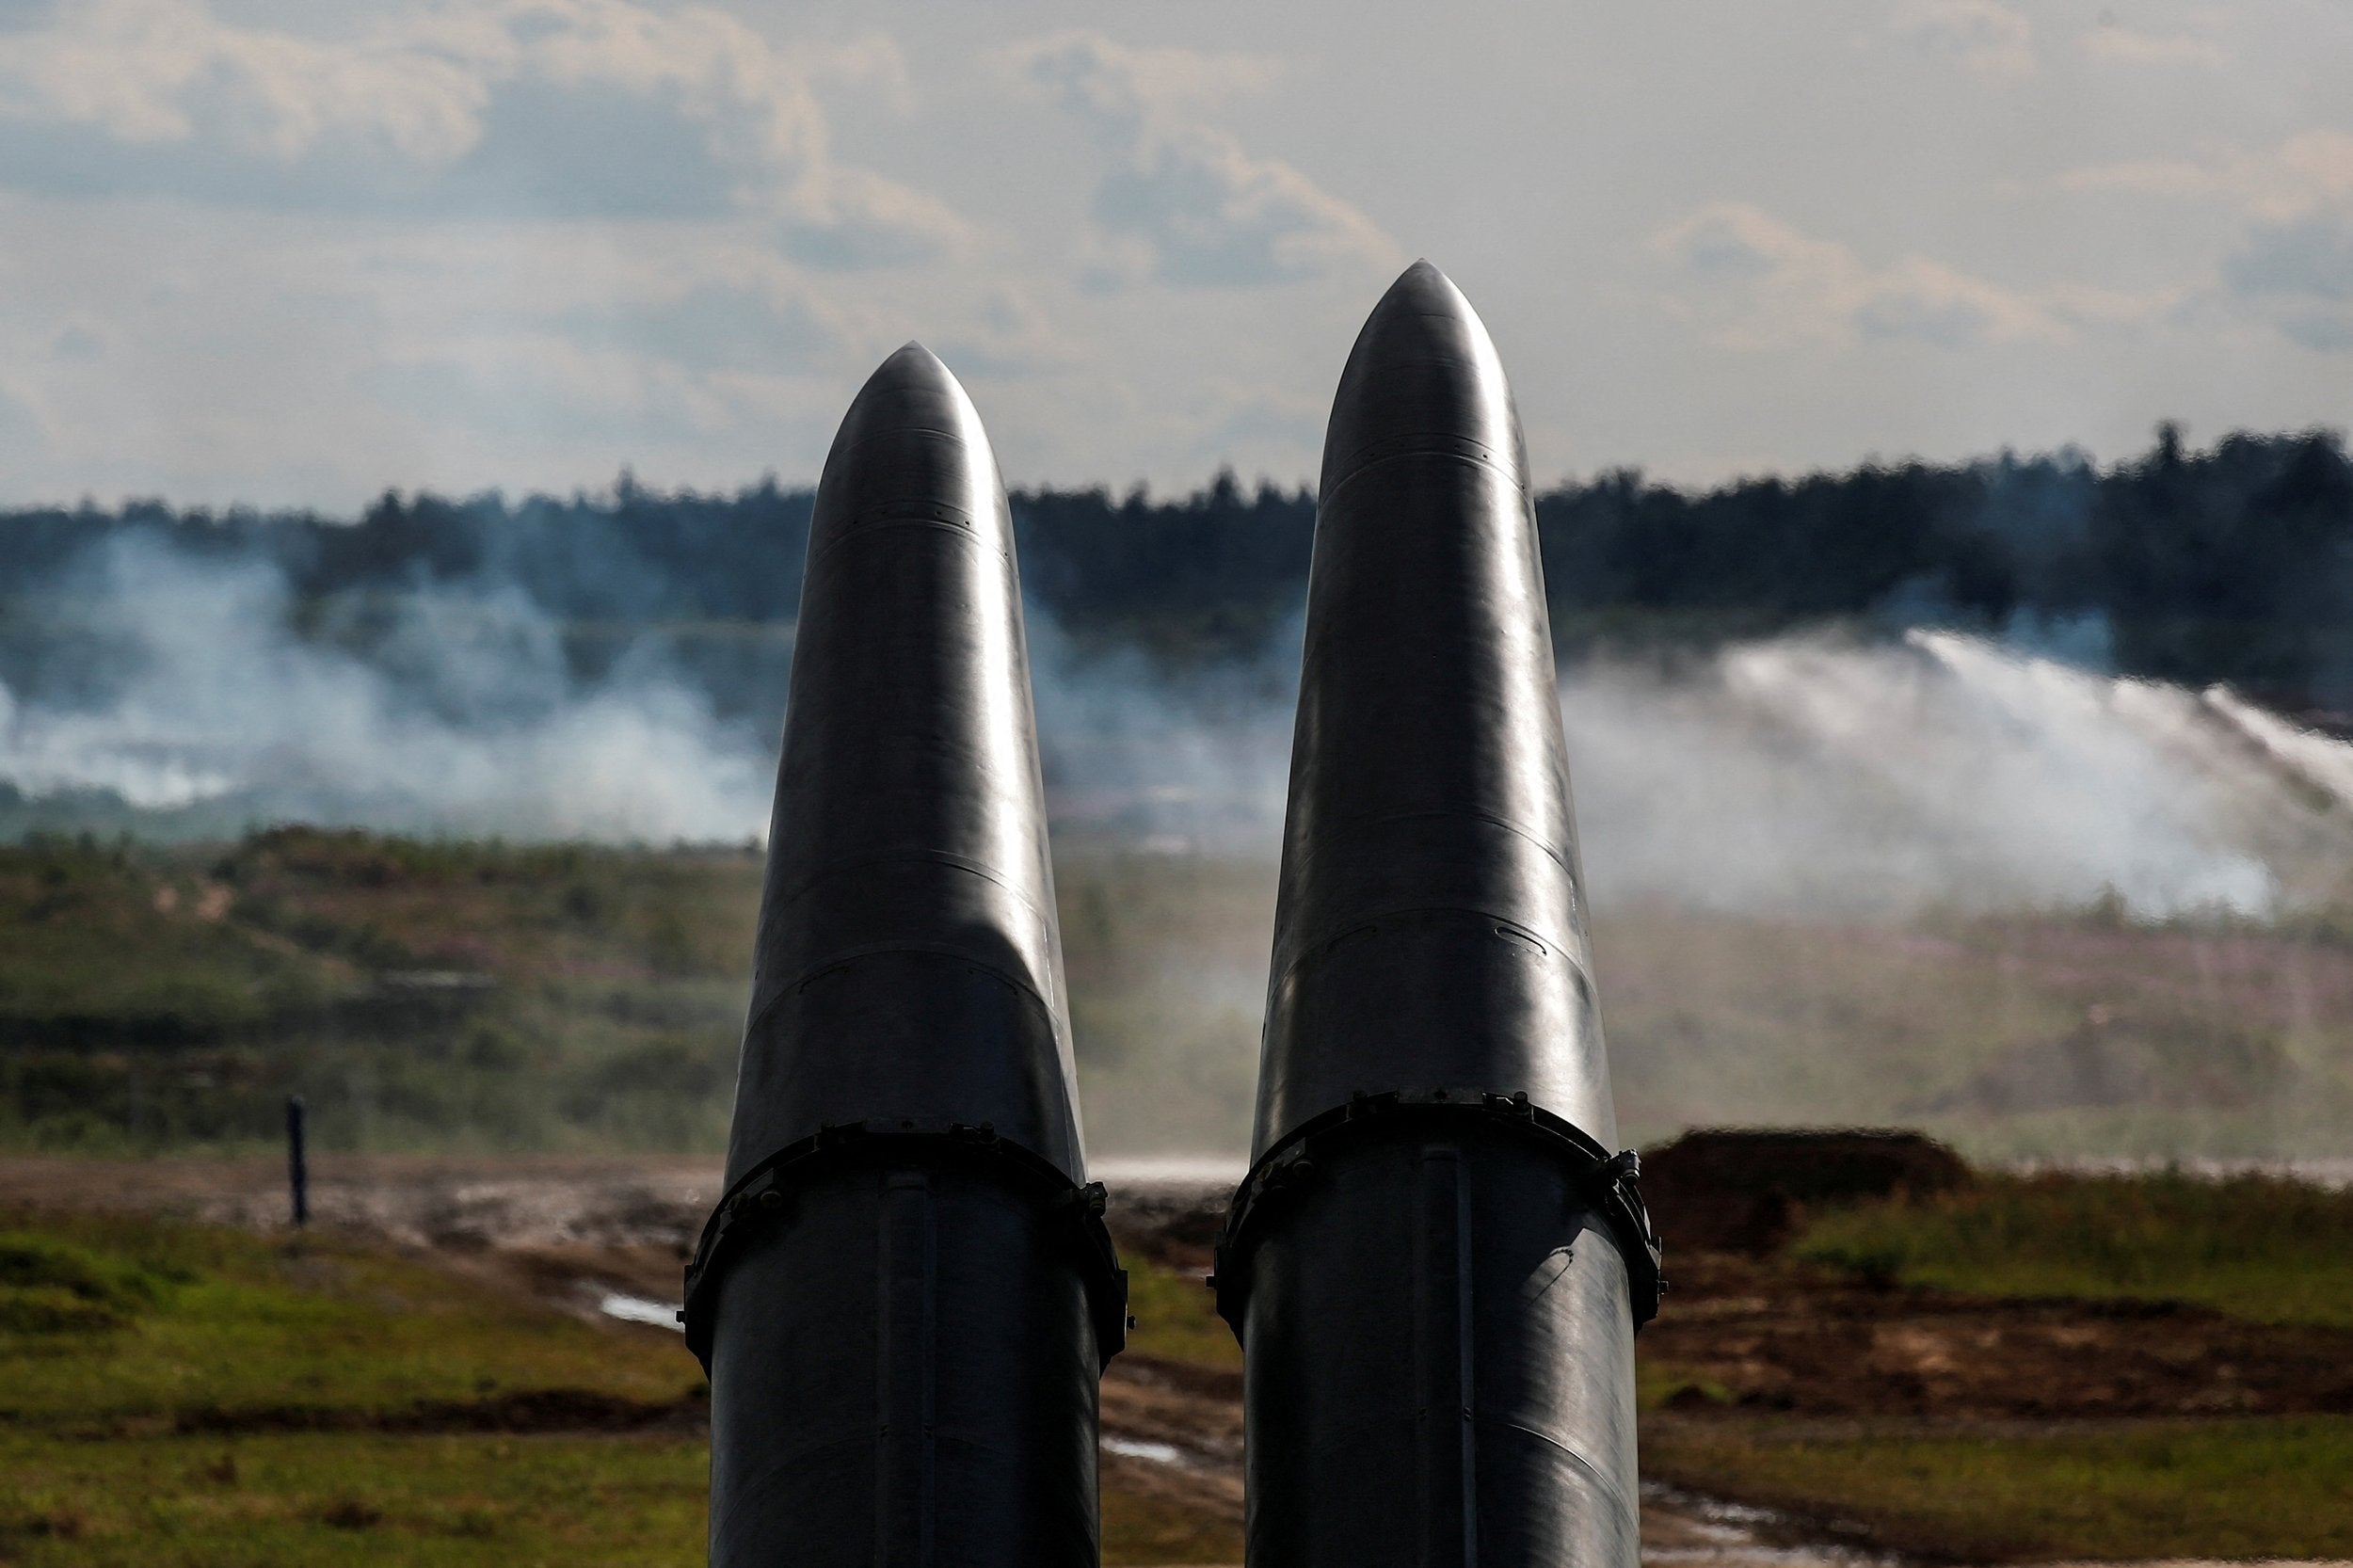 Belarus says it is now operating Russian Iskander missiles autonomously